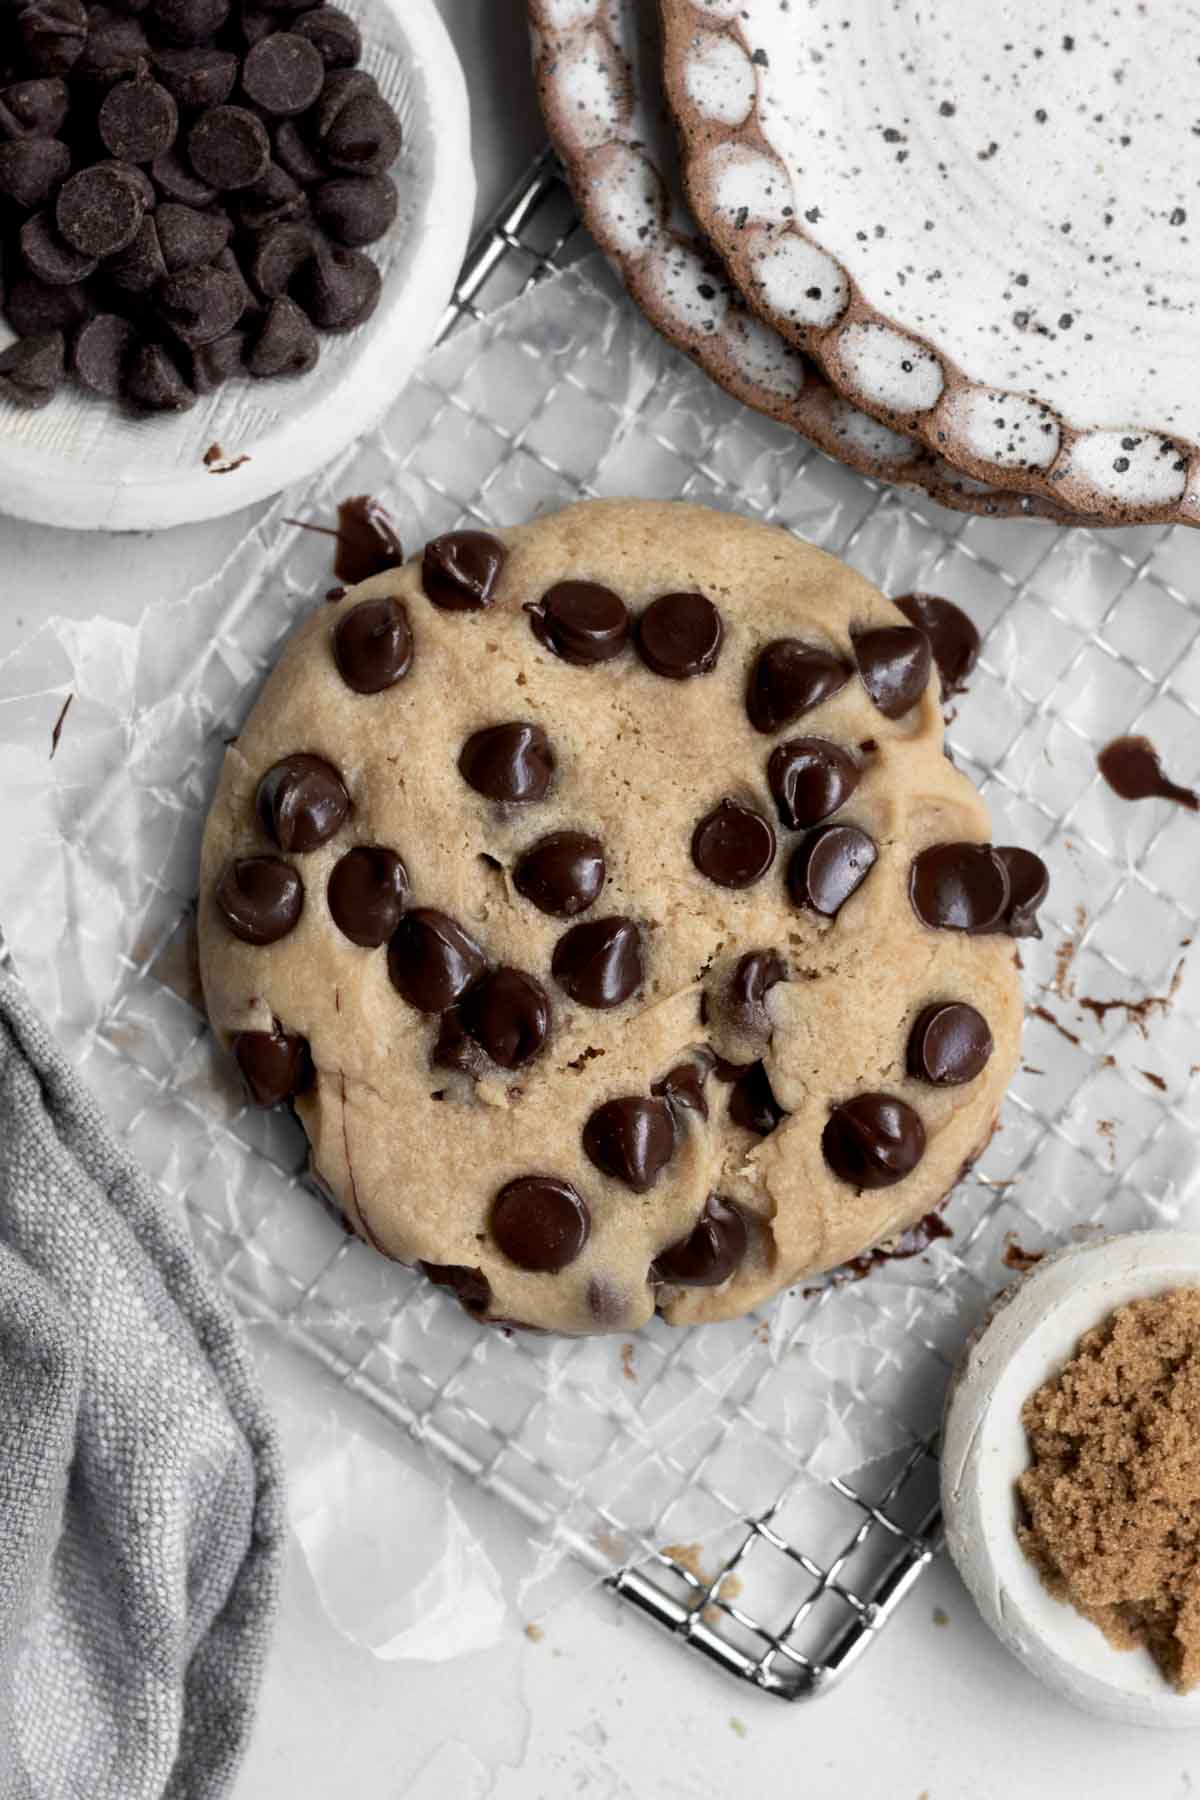 A perfect gluten free Microwave Chocolate Chip Cookie with delicious slightly melted chocolate chips.